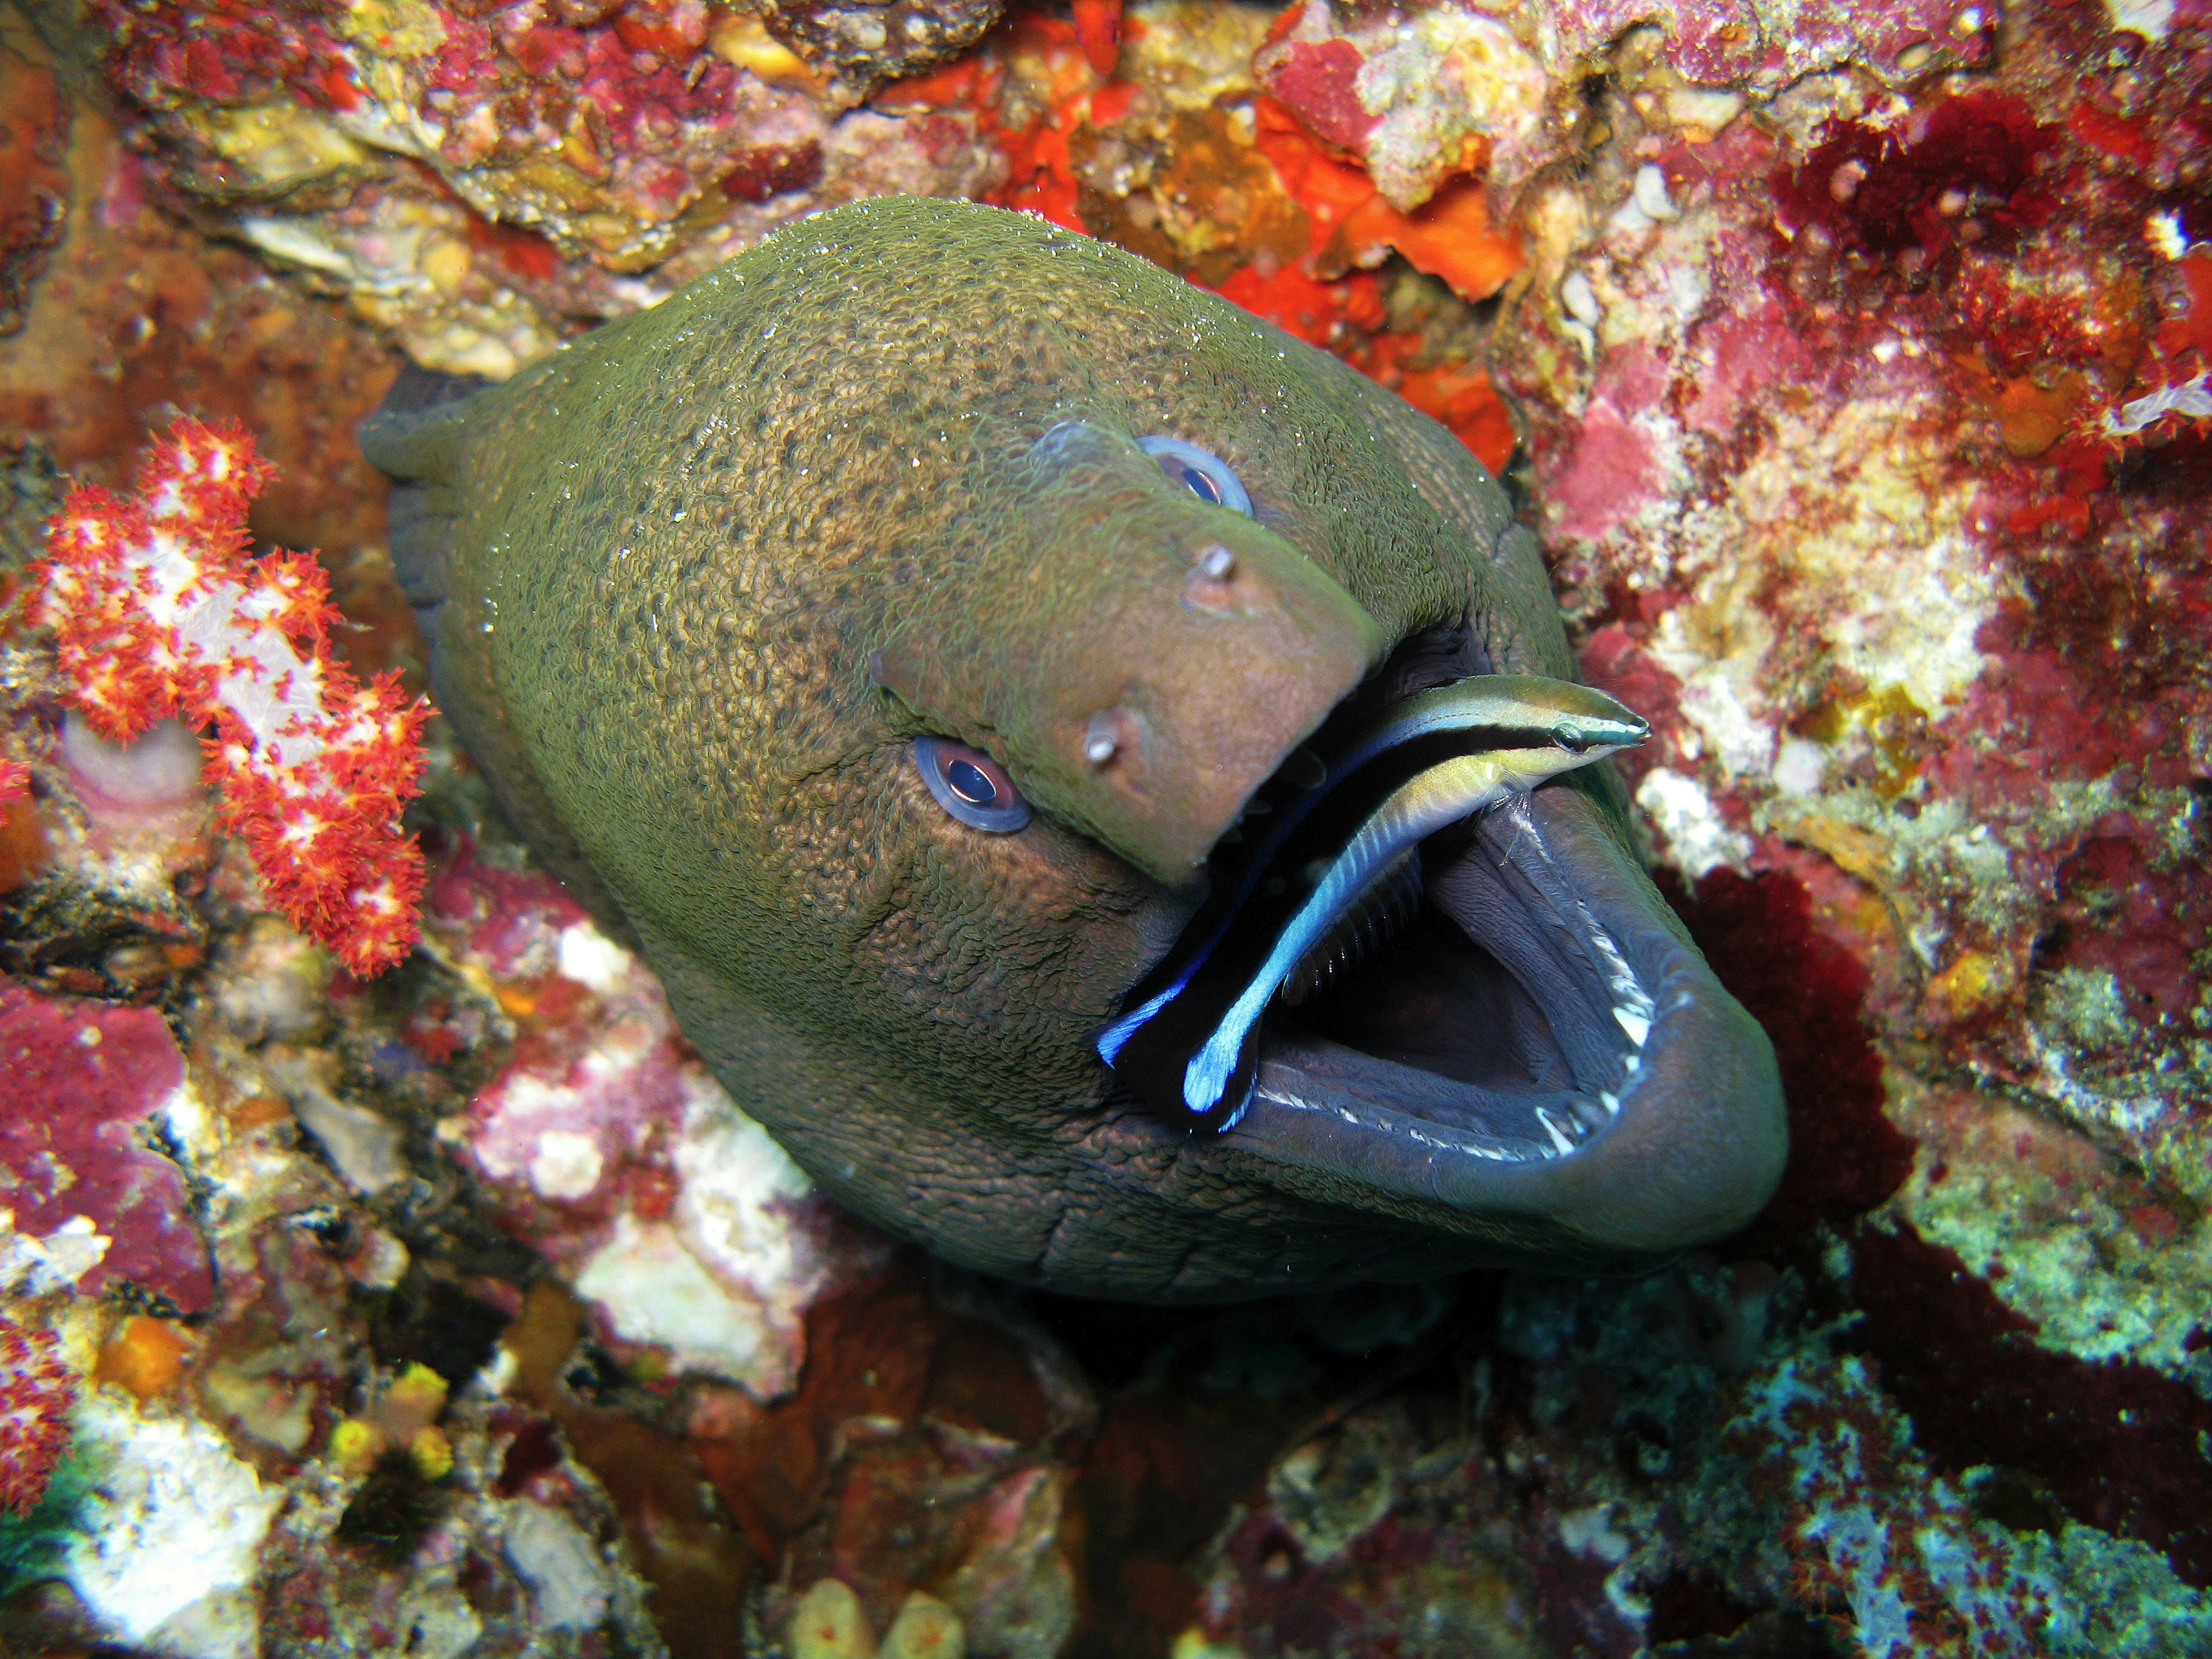 A cleaner fish cleans a giant moray eel